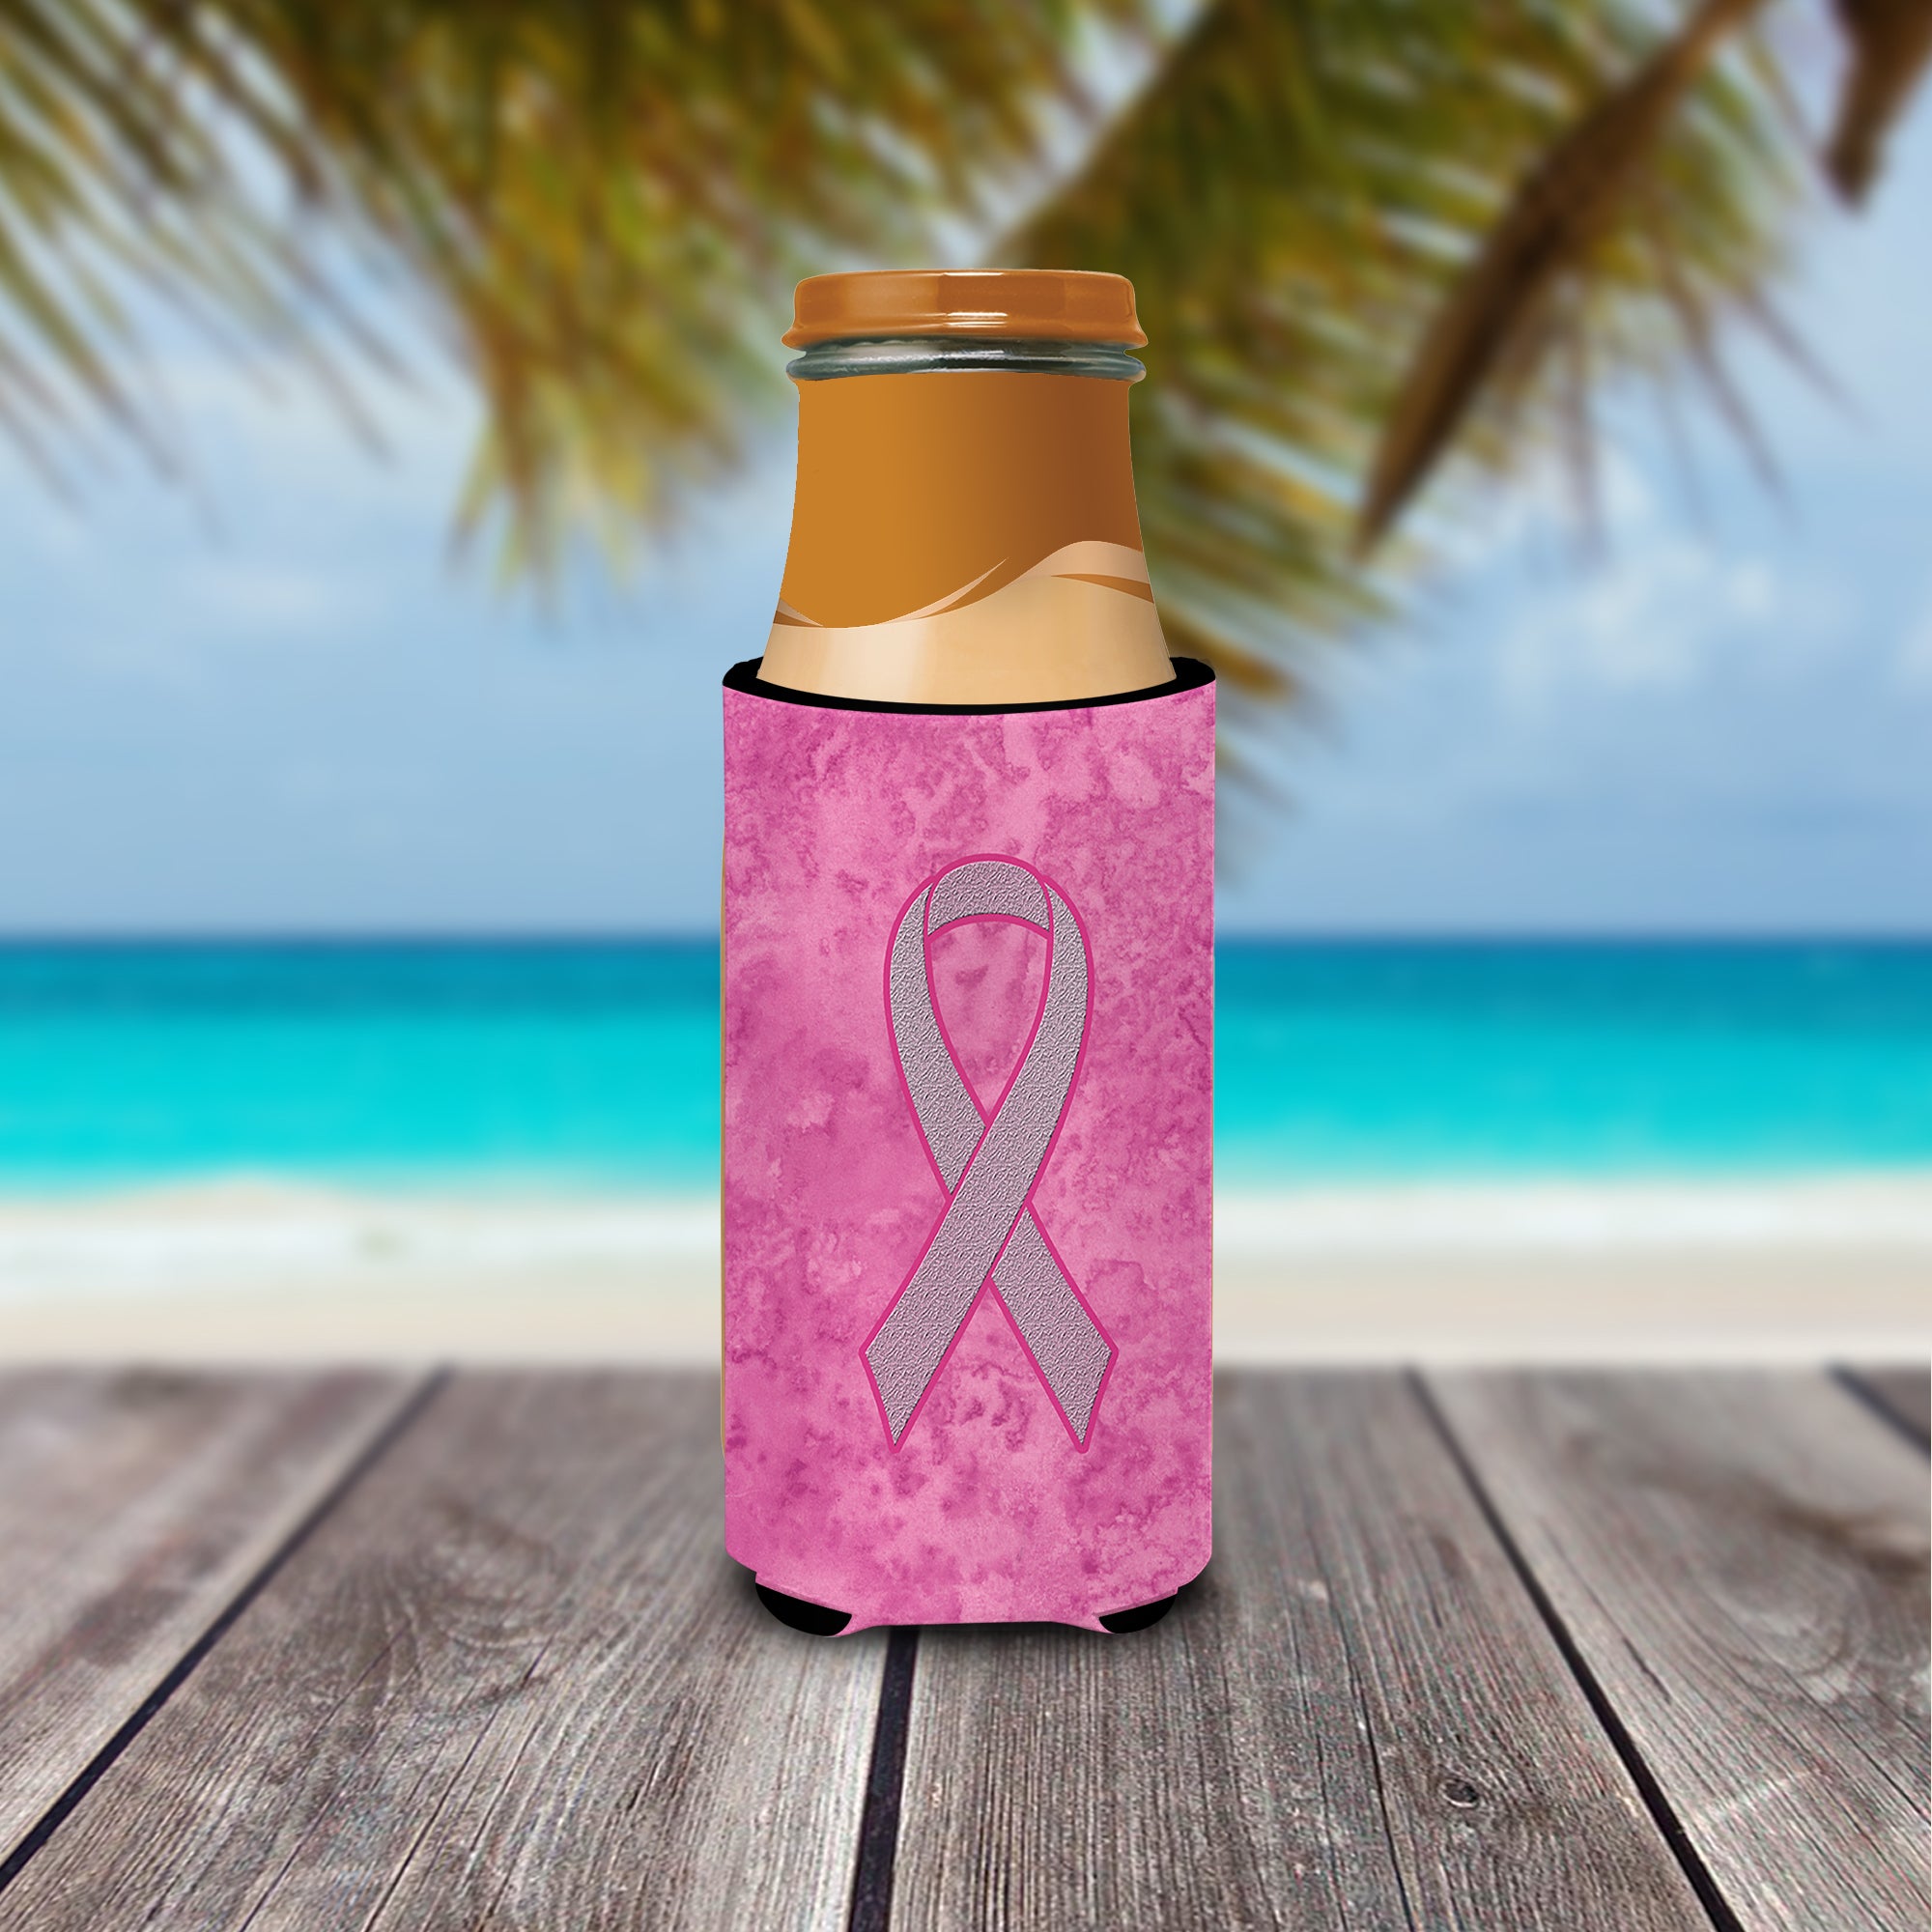 Pink Ribbon for Breast Cancer Awareness Ultra Beverage Insulators for slim cans AN1205MUK.